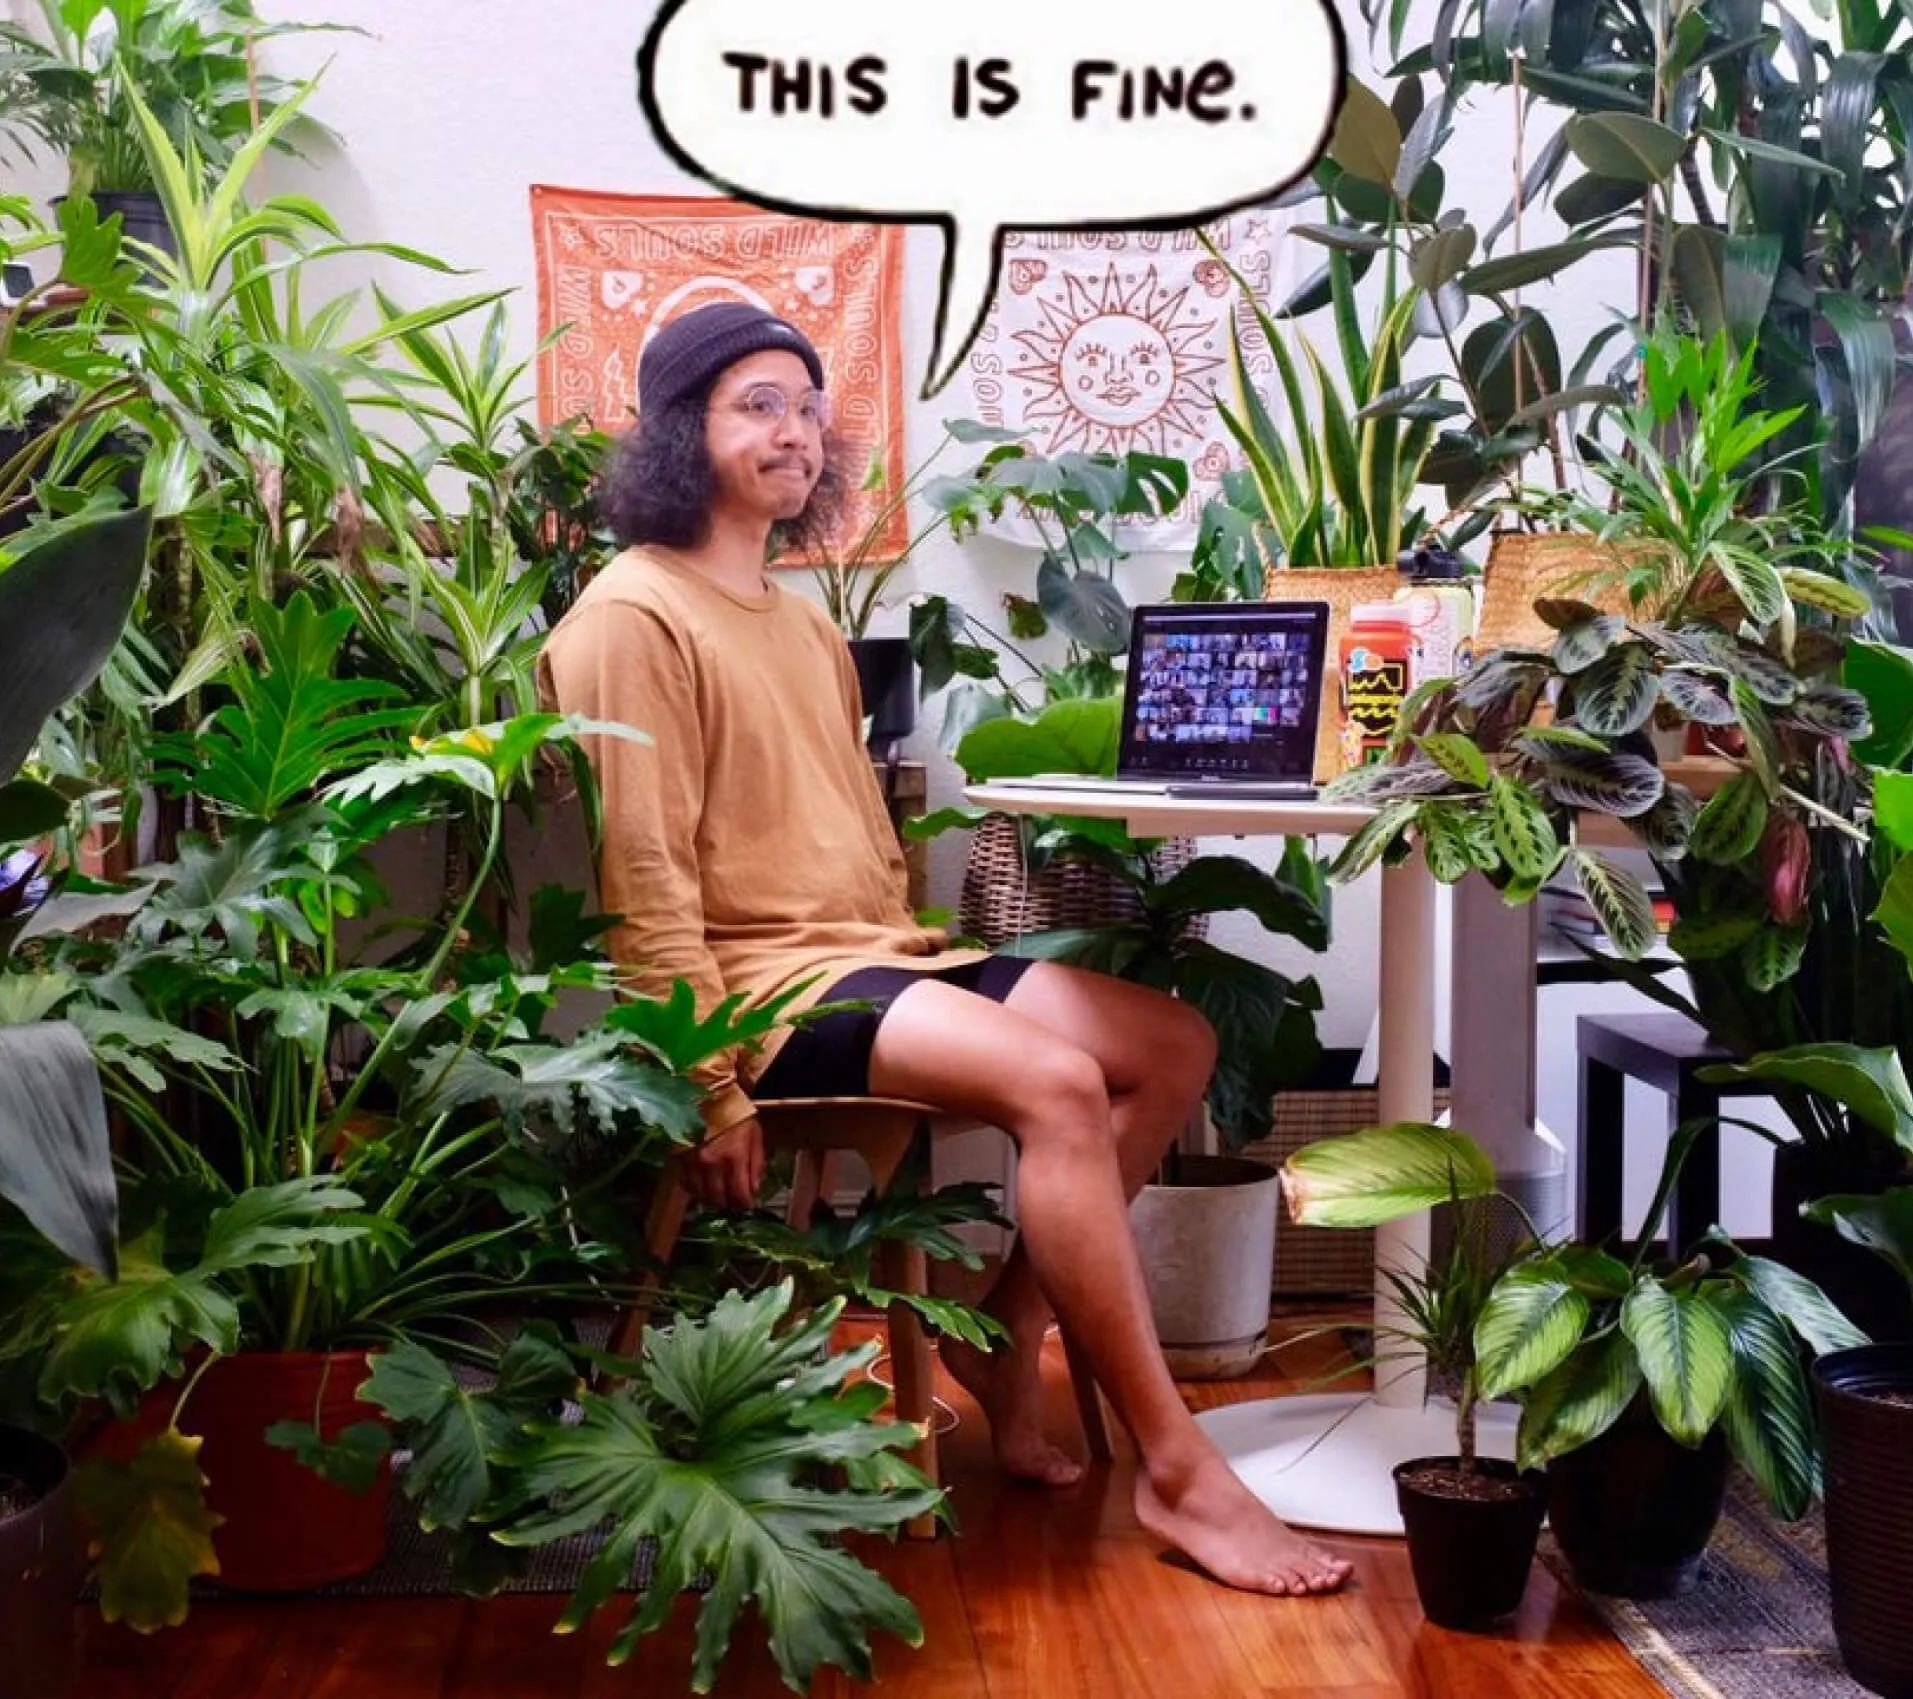 A person sitting at a desk in a room full of plants with a speech bubble that reads "This is fine."